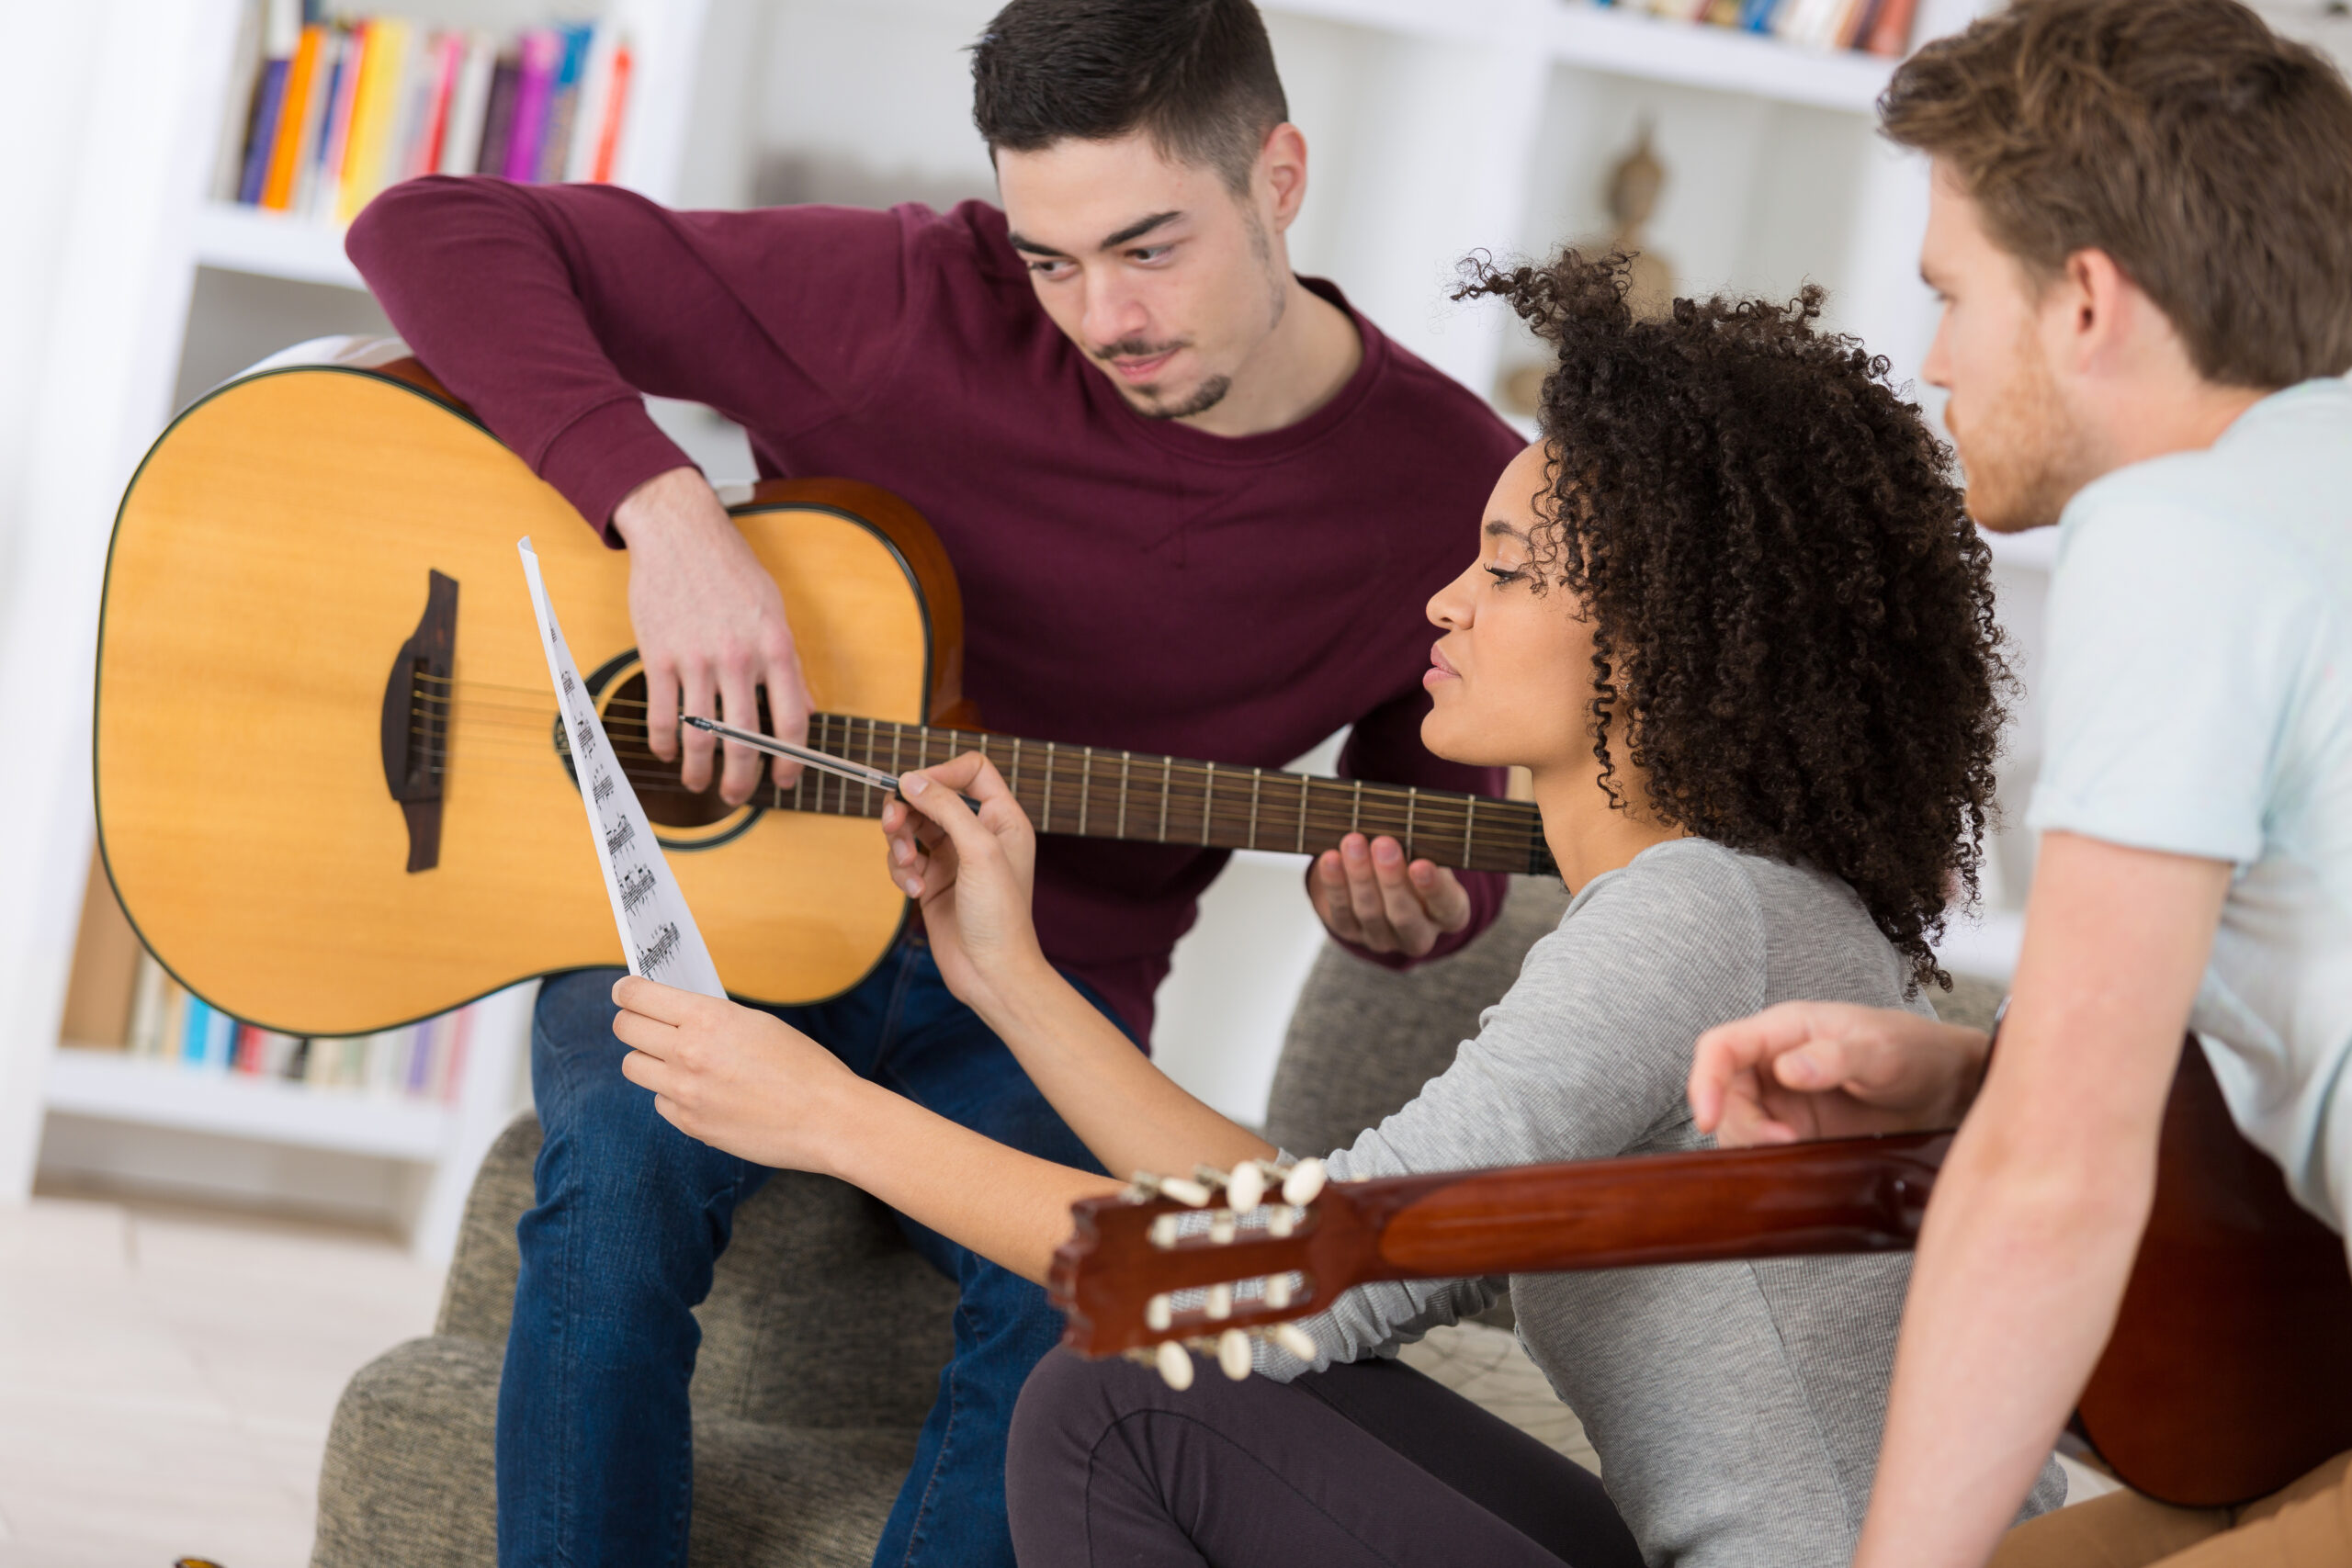 Young people playing music, songwriting